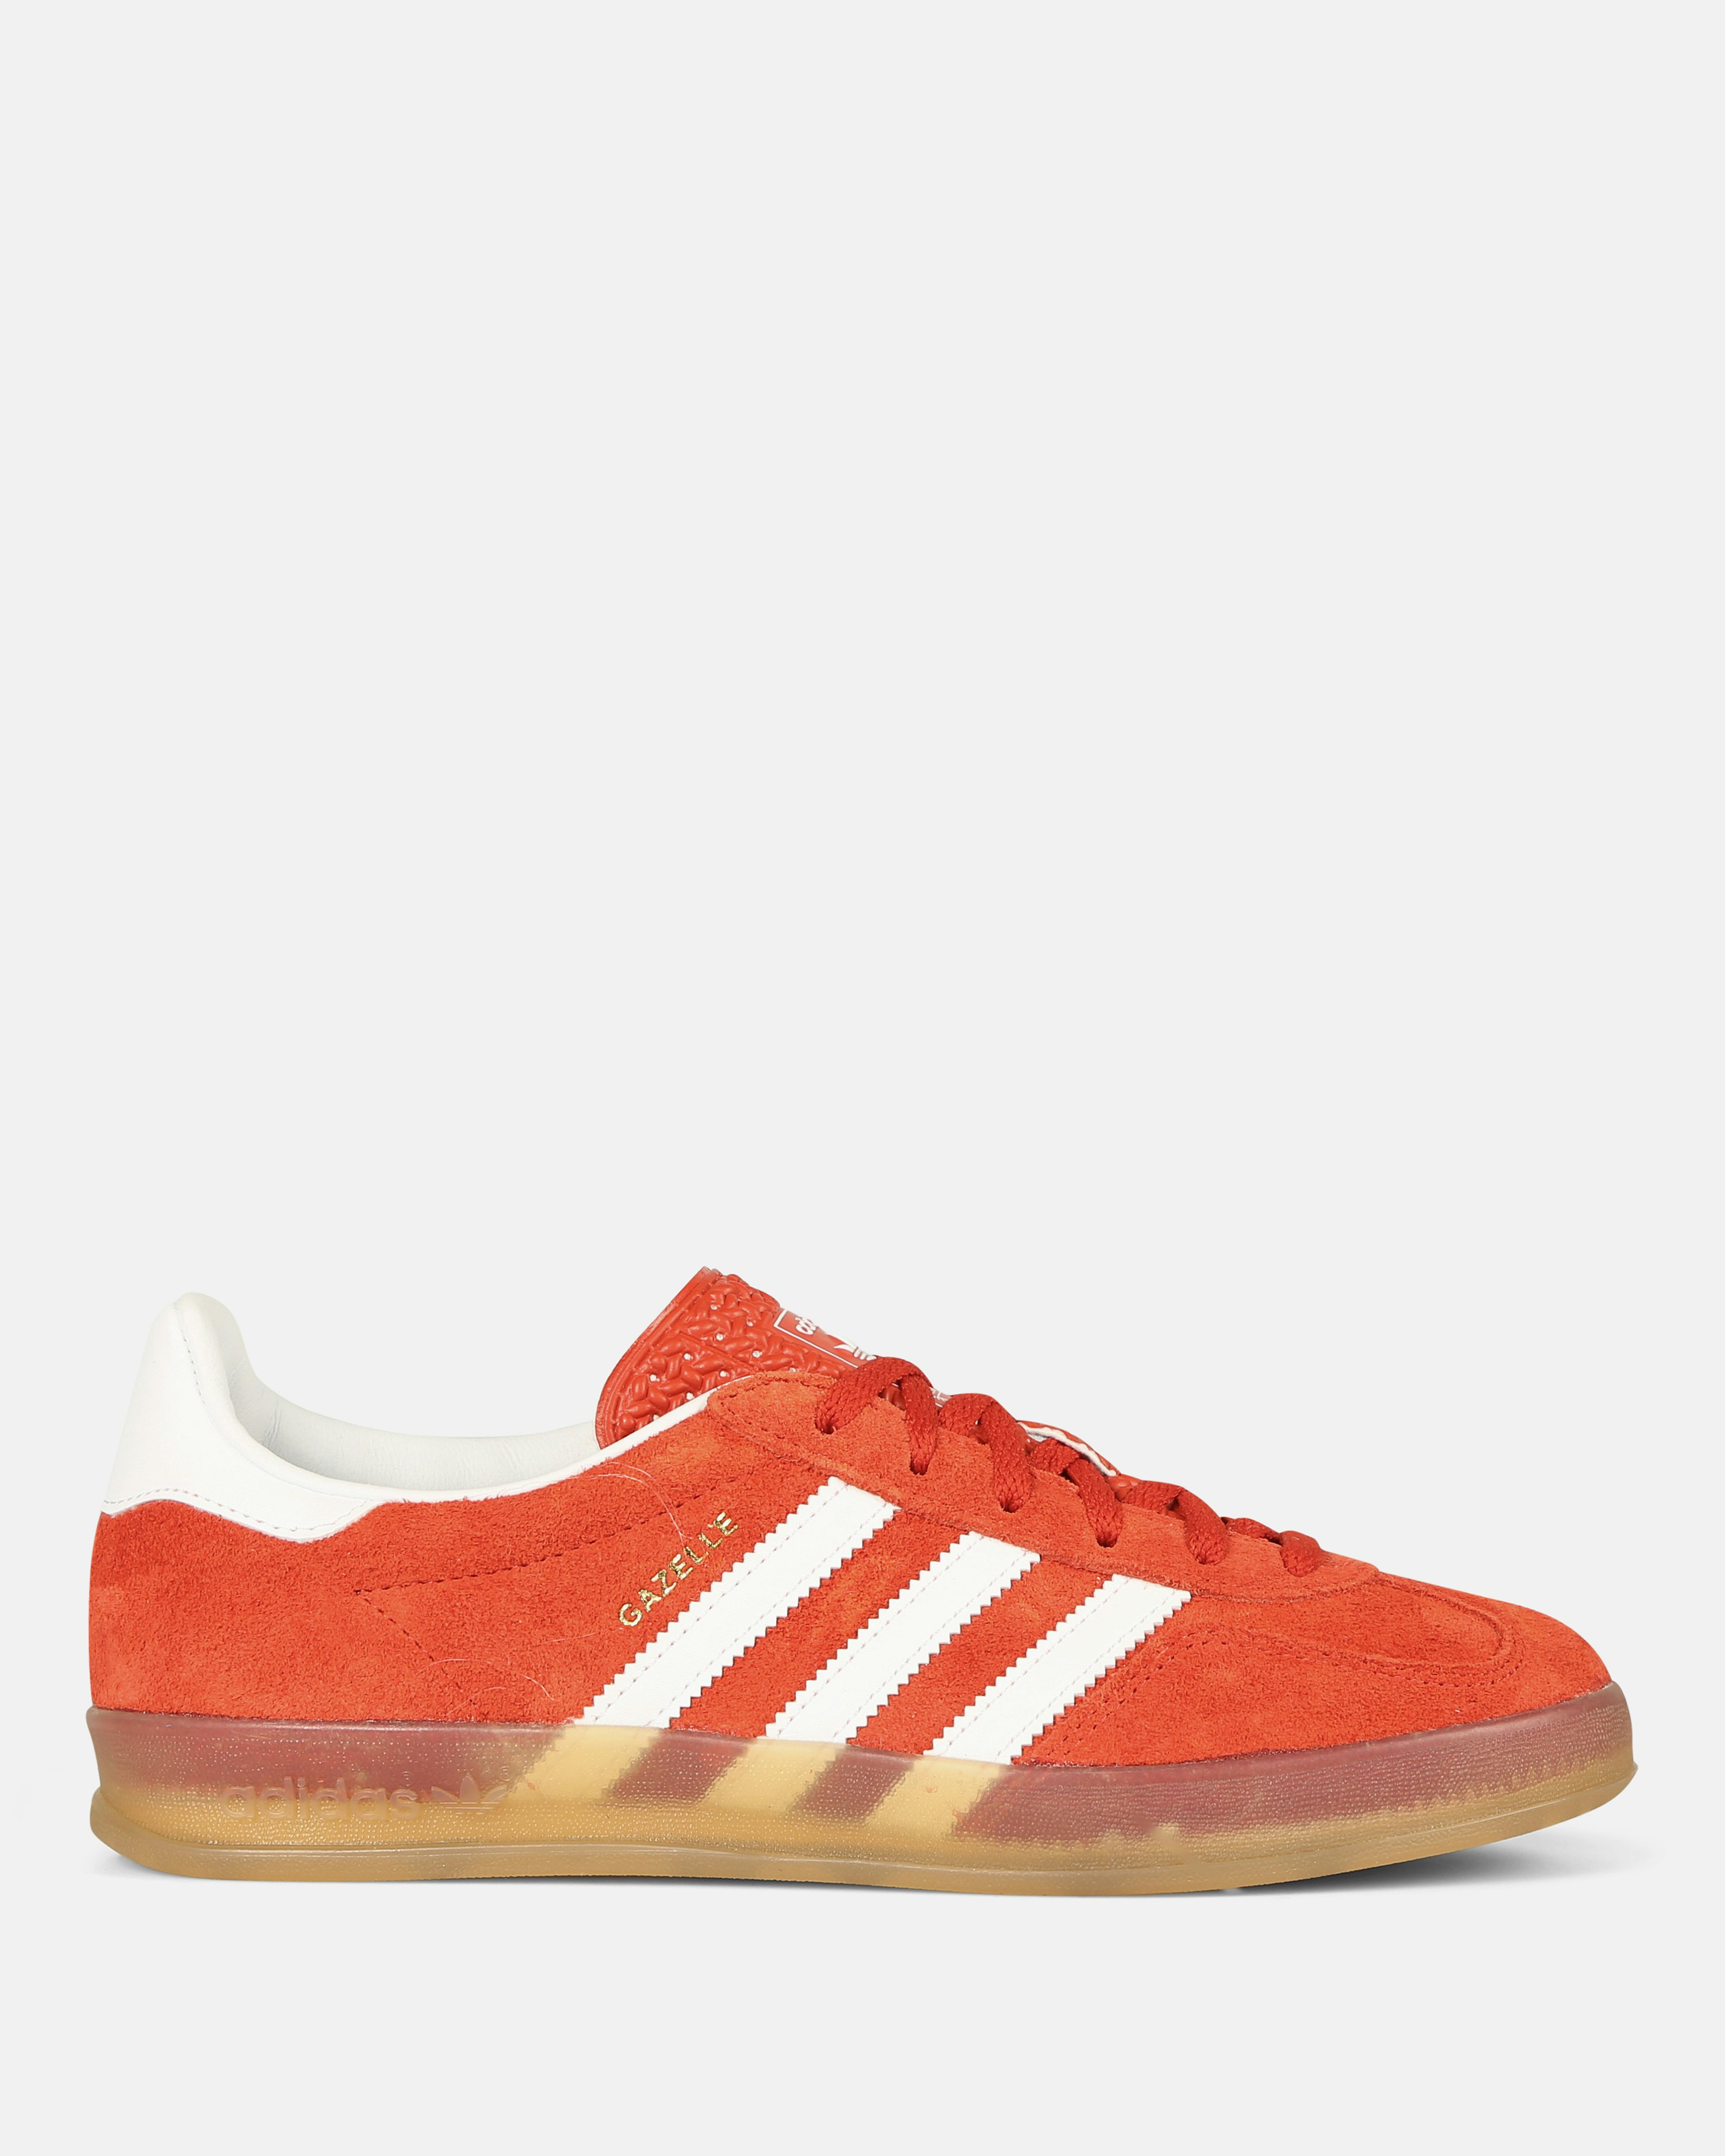 Affordable Sneakers You'll Love : The Adidas Samba Gazelle Indoor 